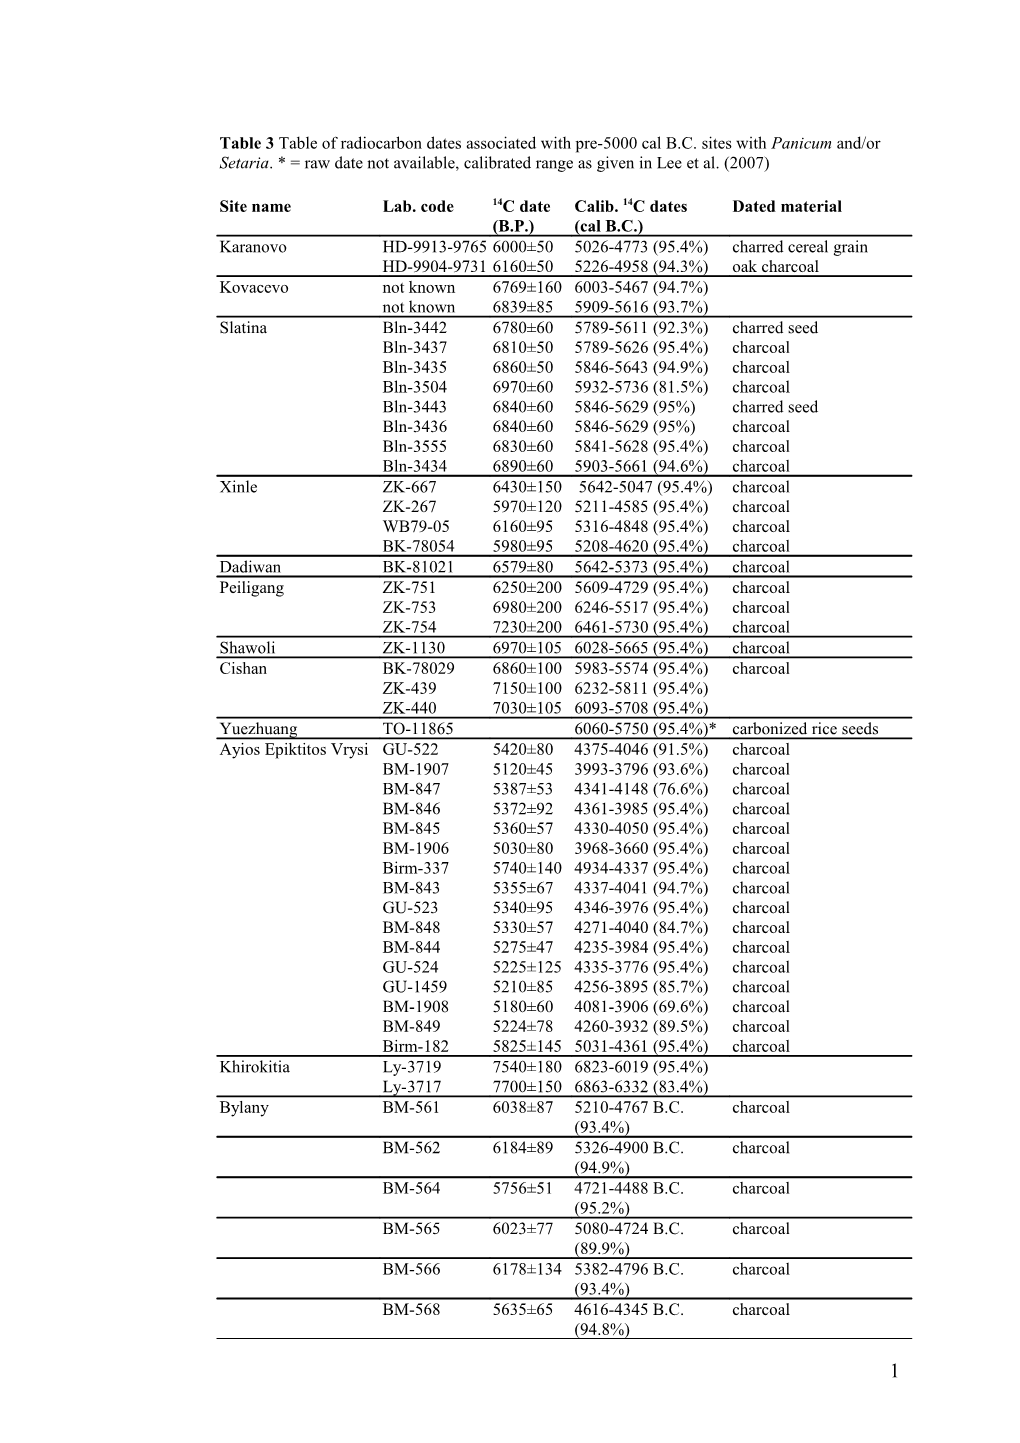 Table 3 Table of Radiocarbon Dates Associated with Pre-5000 Cal B